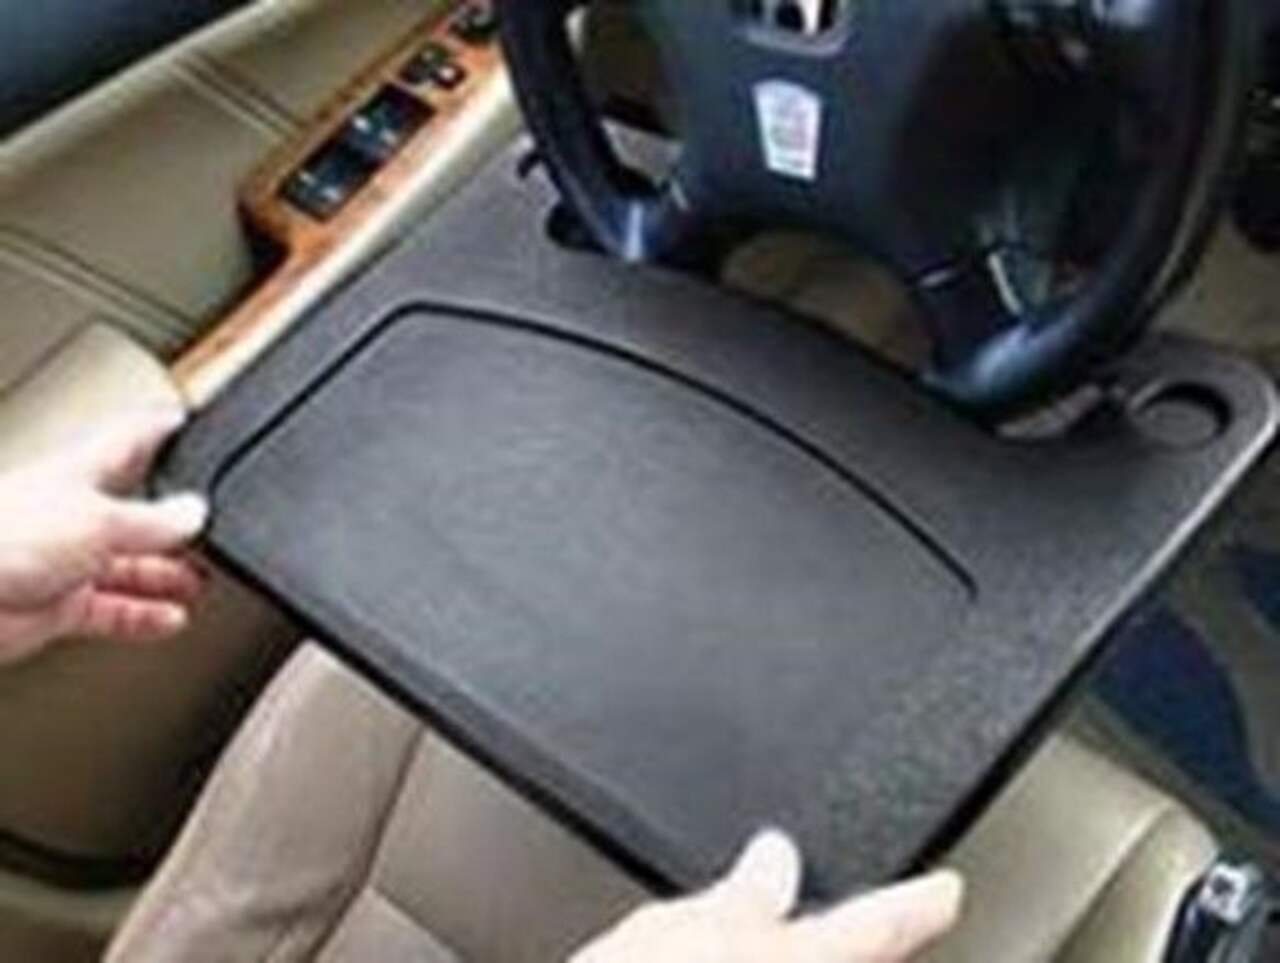 https://media-www.canadiantire.ca/product/automotive/car-care-accessories/auto-accessories/0373151/autotrends-steering-wheel-tray-d309f001-8bbd-42b8-88f6-f065909910a0-jpgrendition.jpg?imdensity=1&imwidth=1244&impolicy=mZoom